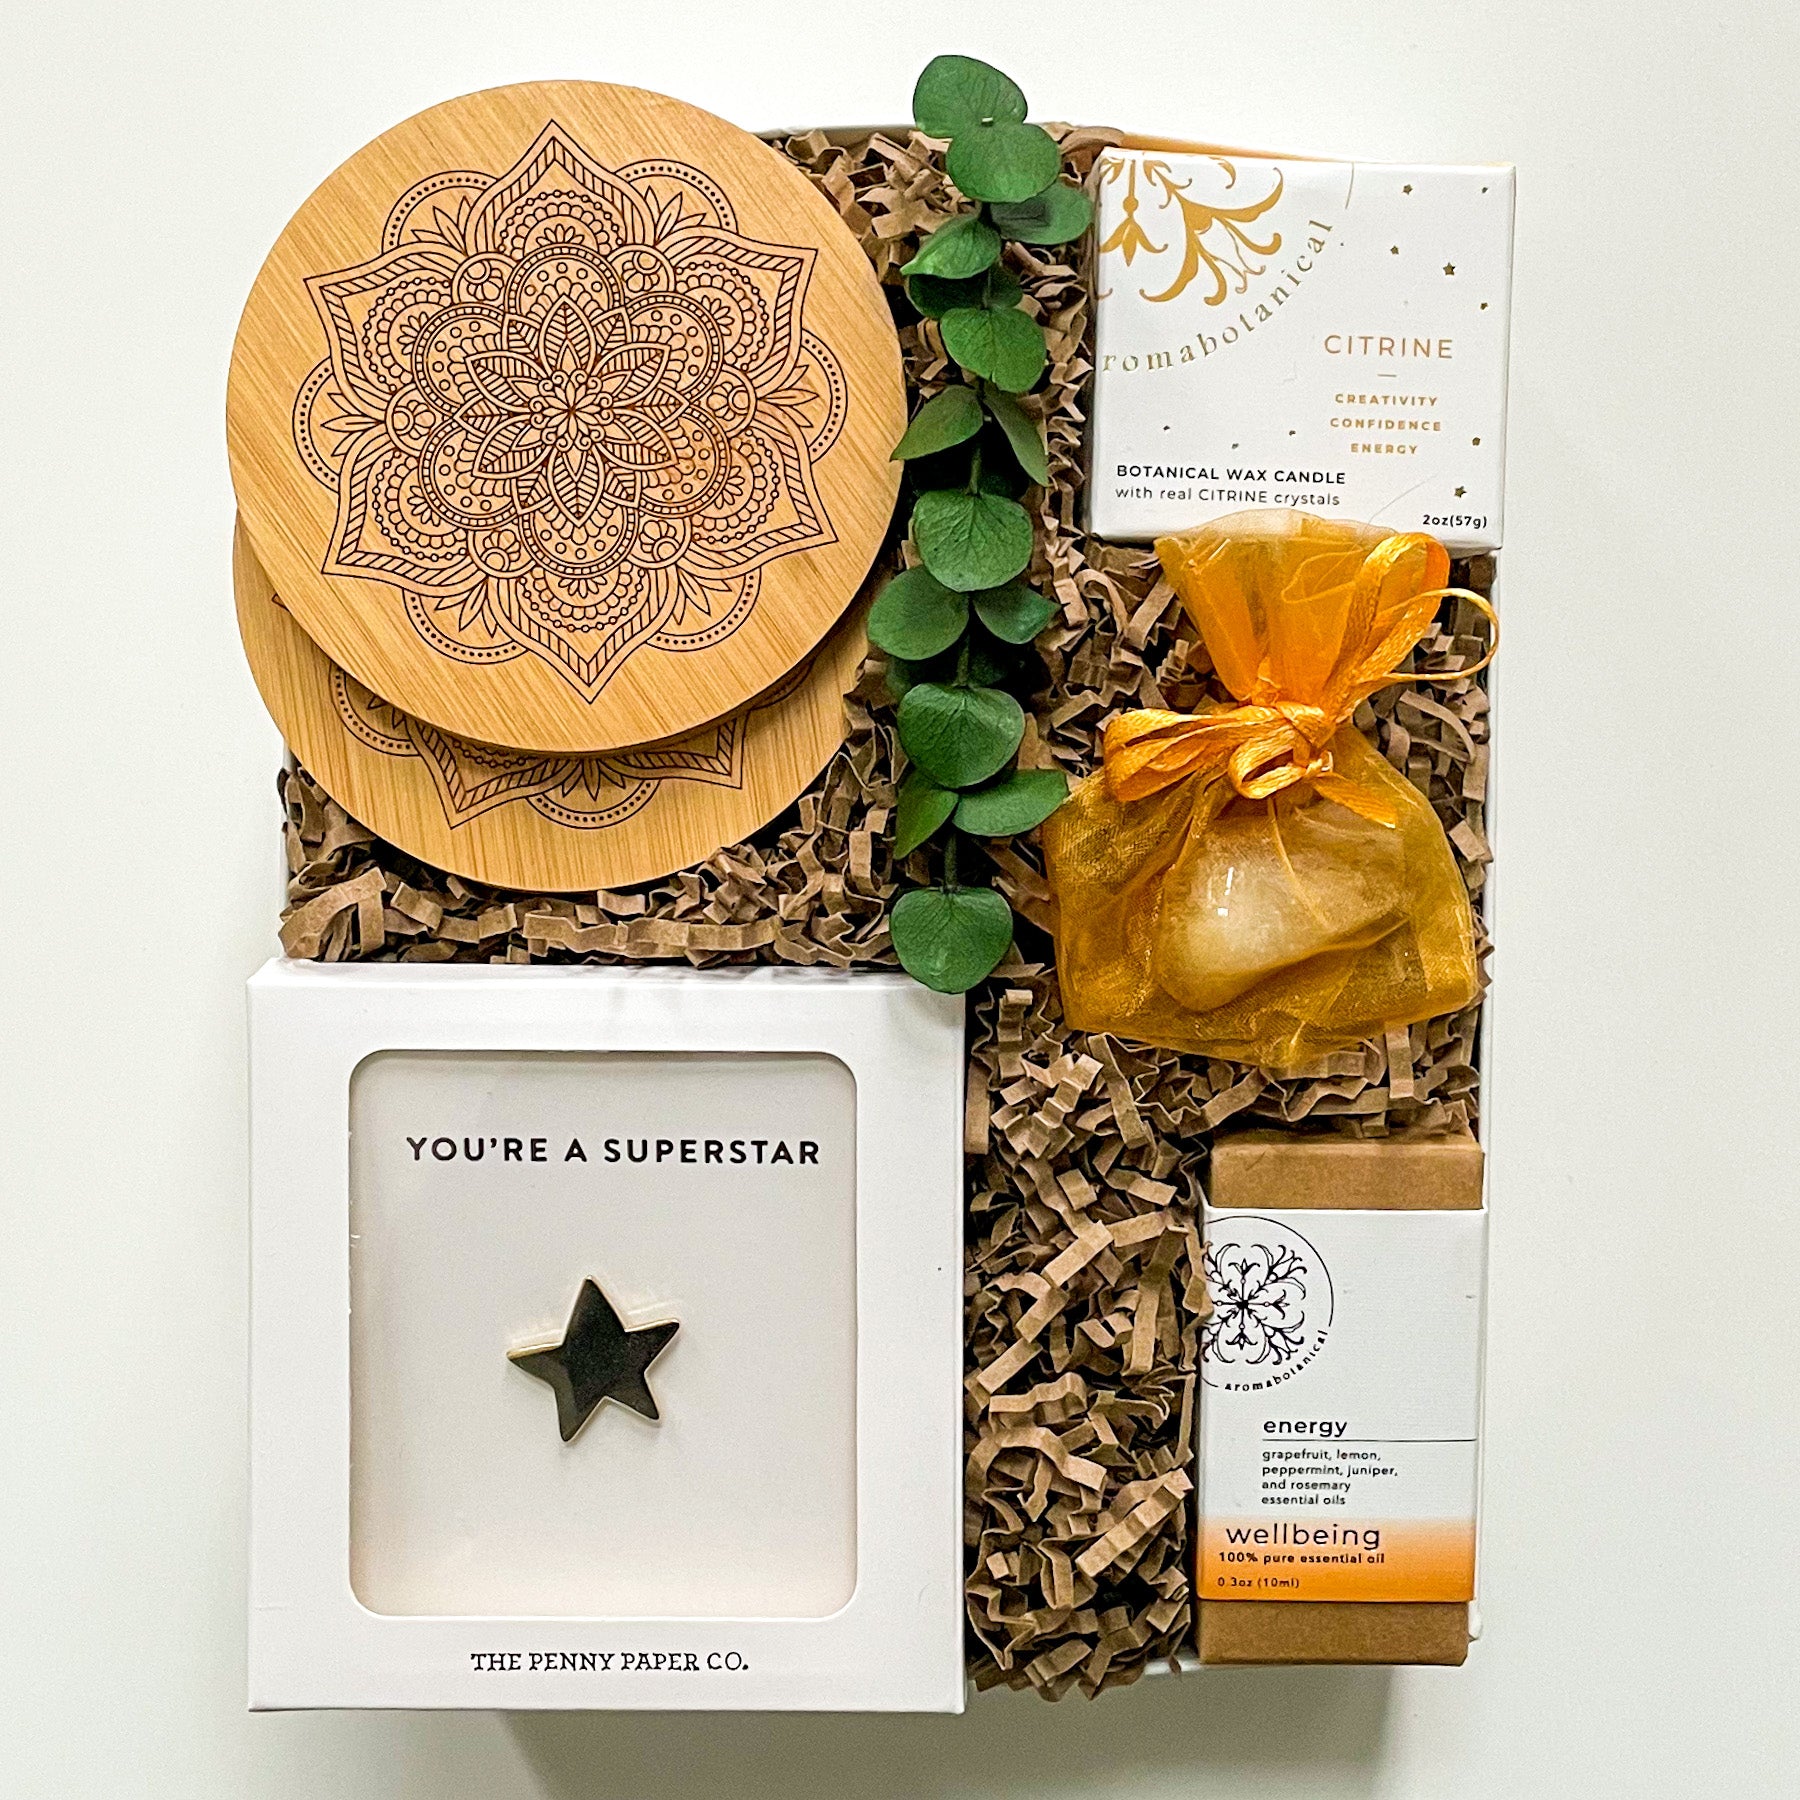 Corporate Gifts, Client Gifts, Corporate Gift Delivery, Client Gift Delivery, Shipped Corporate Gifts, Shipped Client Gifts, Gold star, gold gift ideas, yellow gift boxes, impressive employee gifts